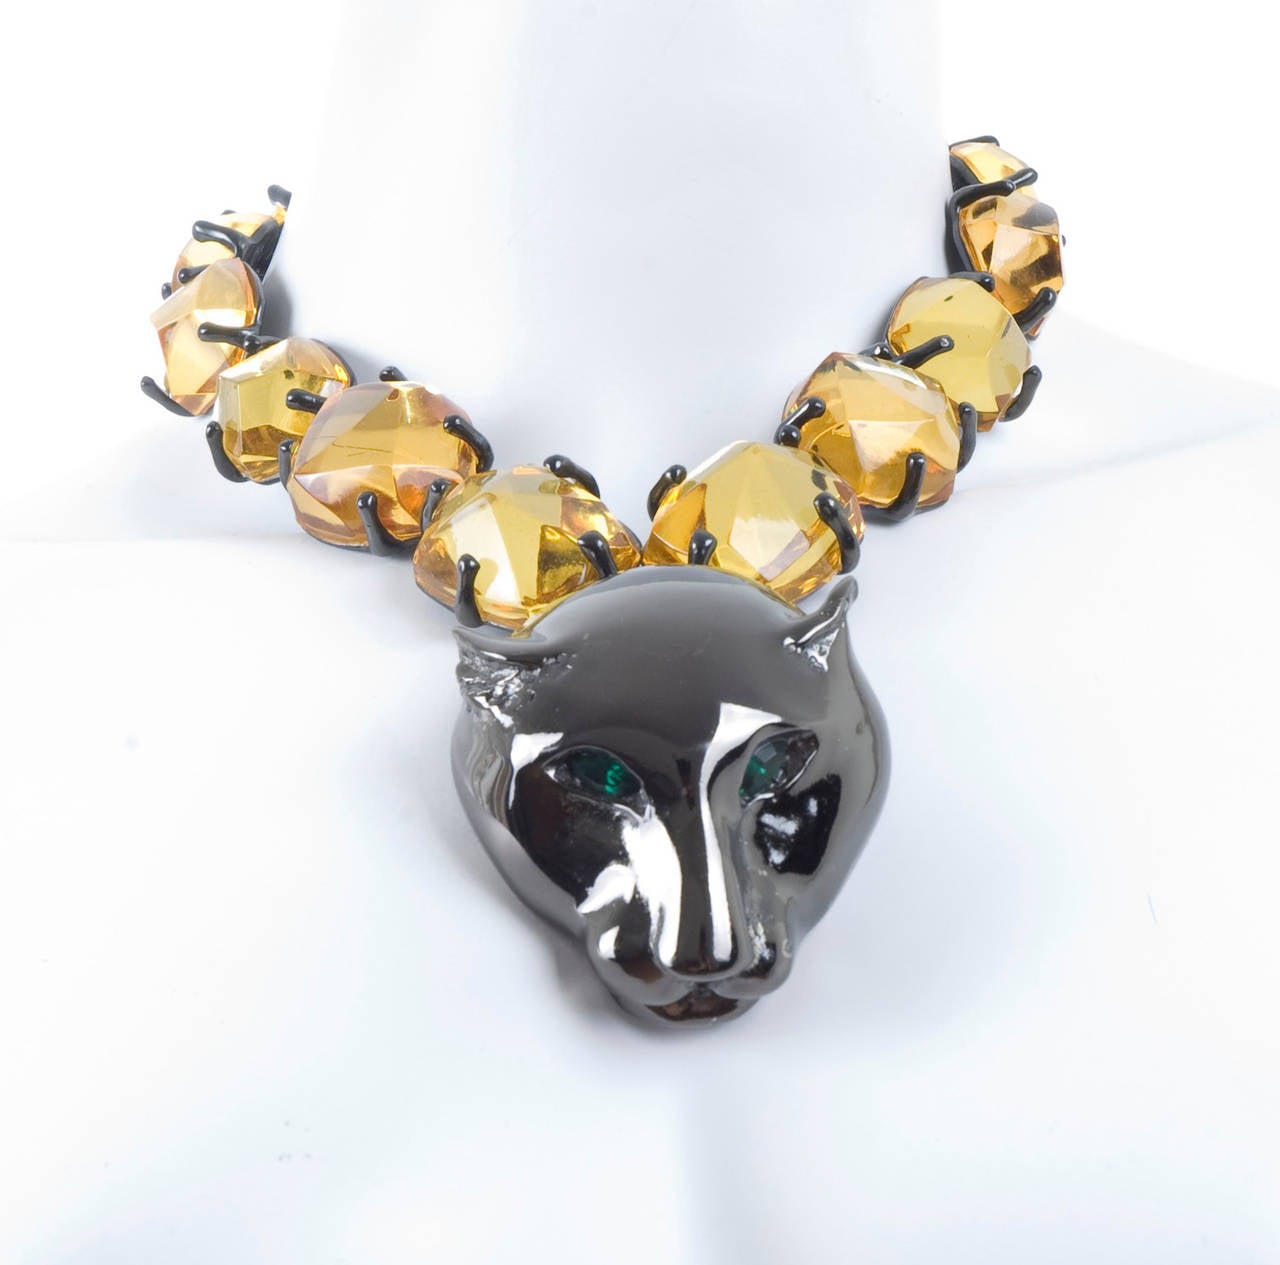 Yves Saint Laurent Necklace and clip-on Earrings.
The large metal Leopard head is 2.5 by 2 inches.
The gold color stones are glass.
In excellent condition